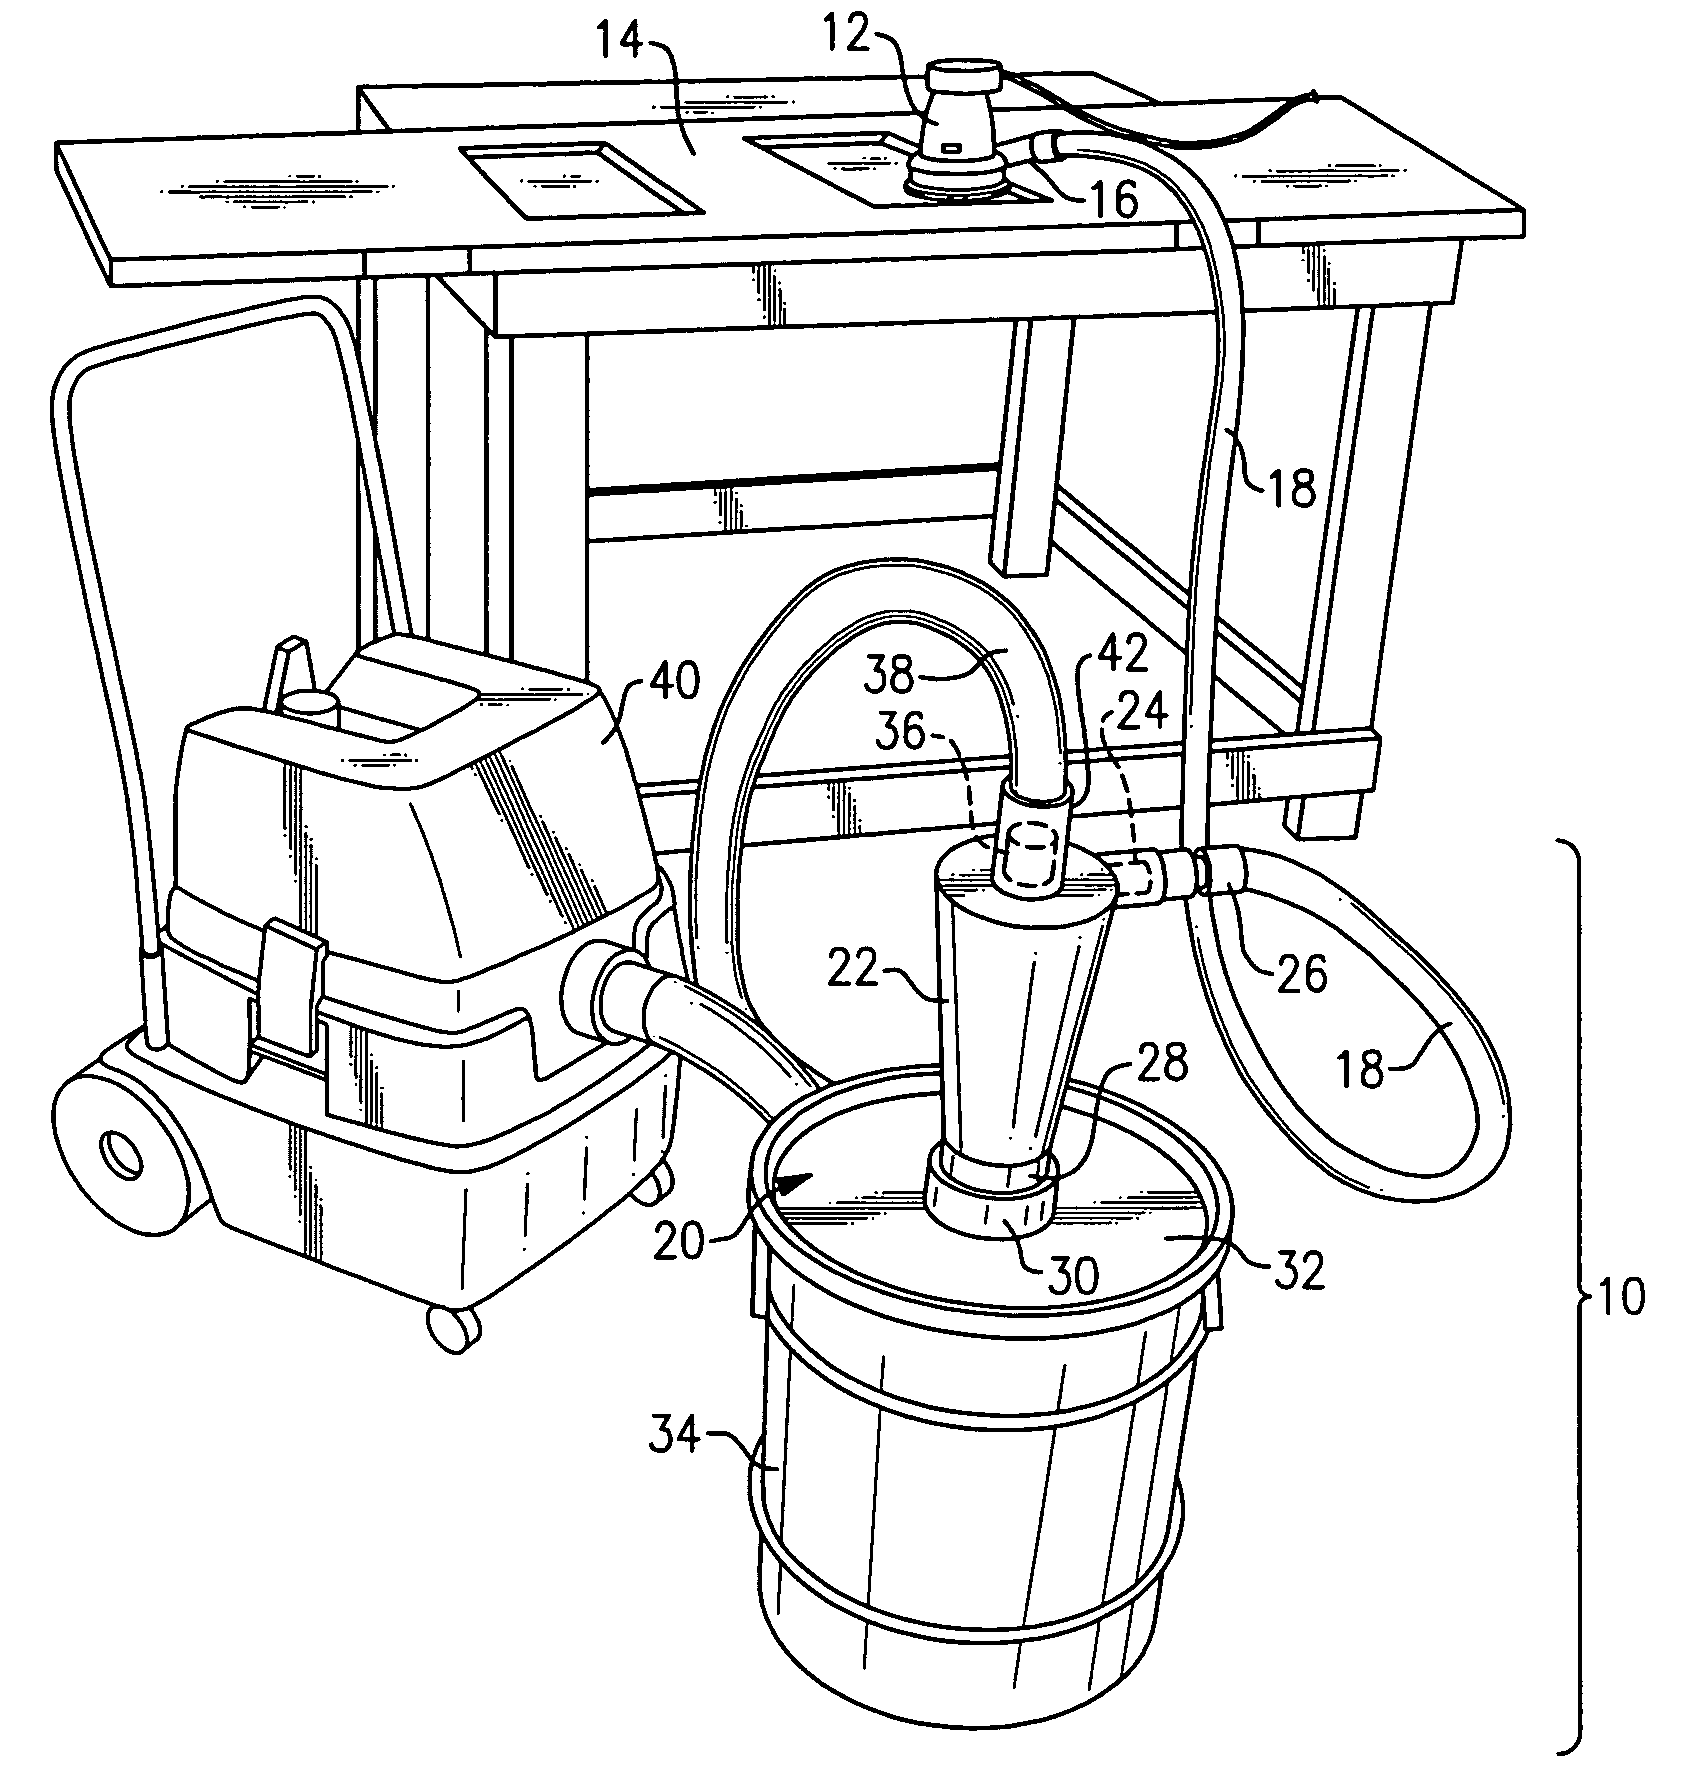 Auxiliary dust collection system